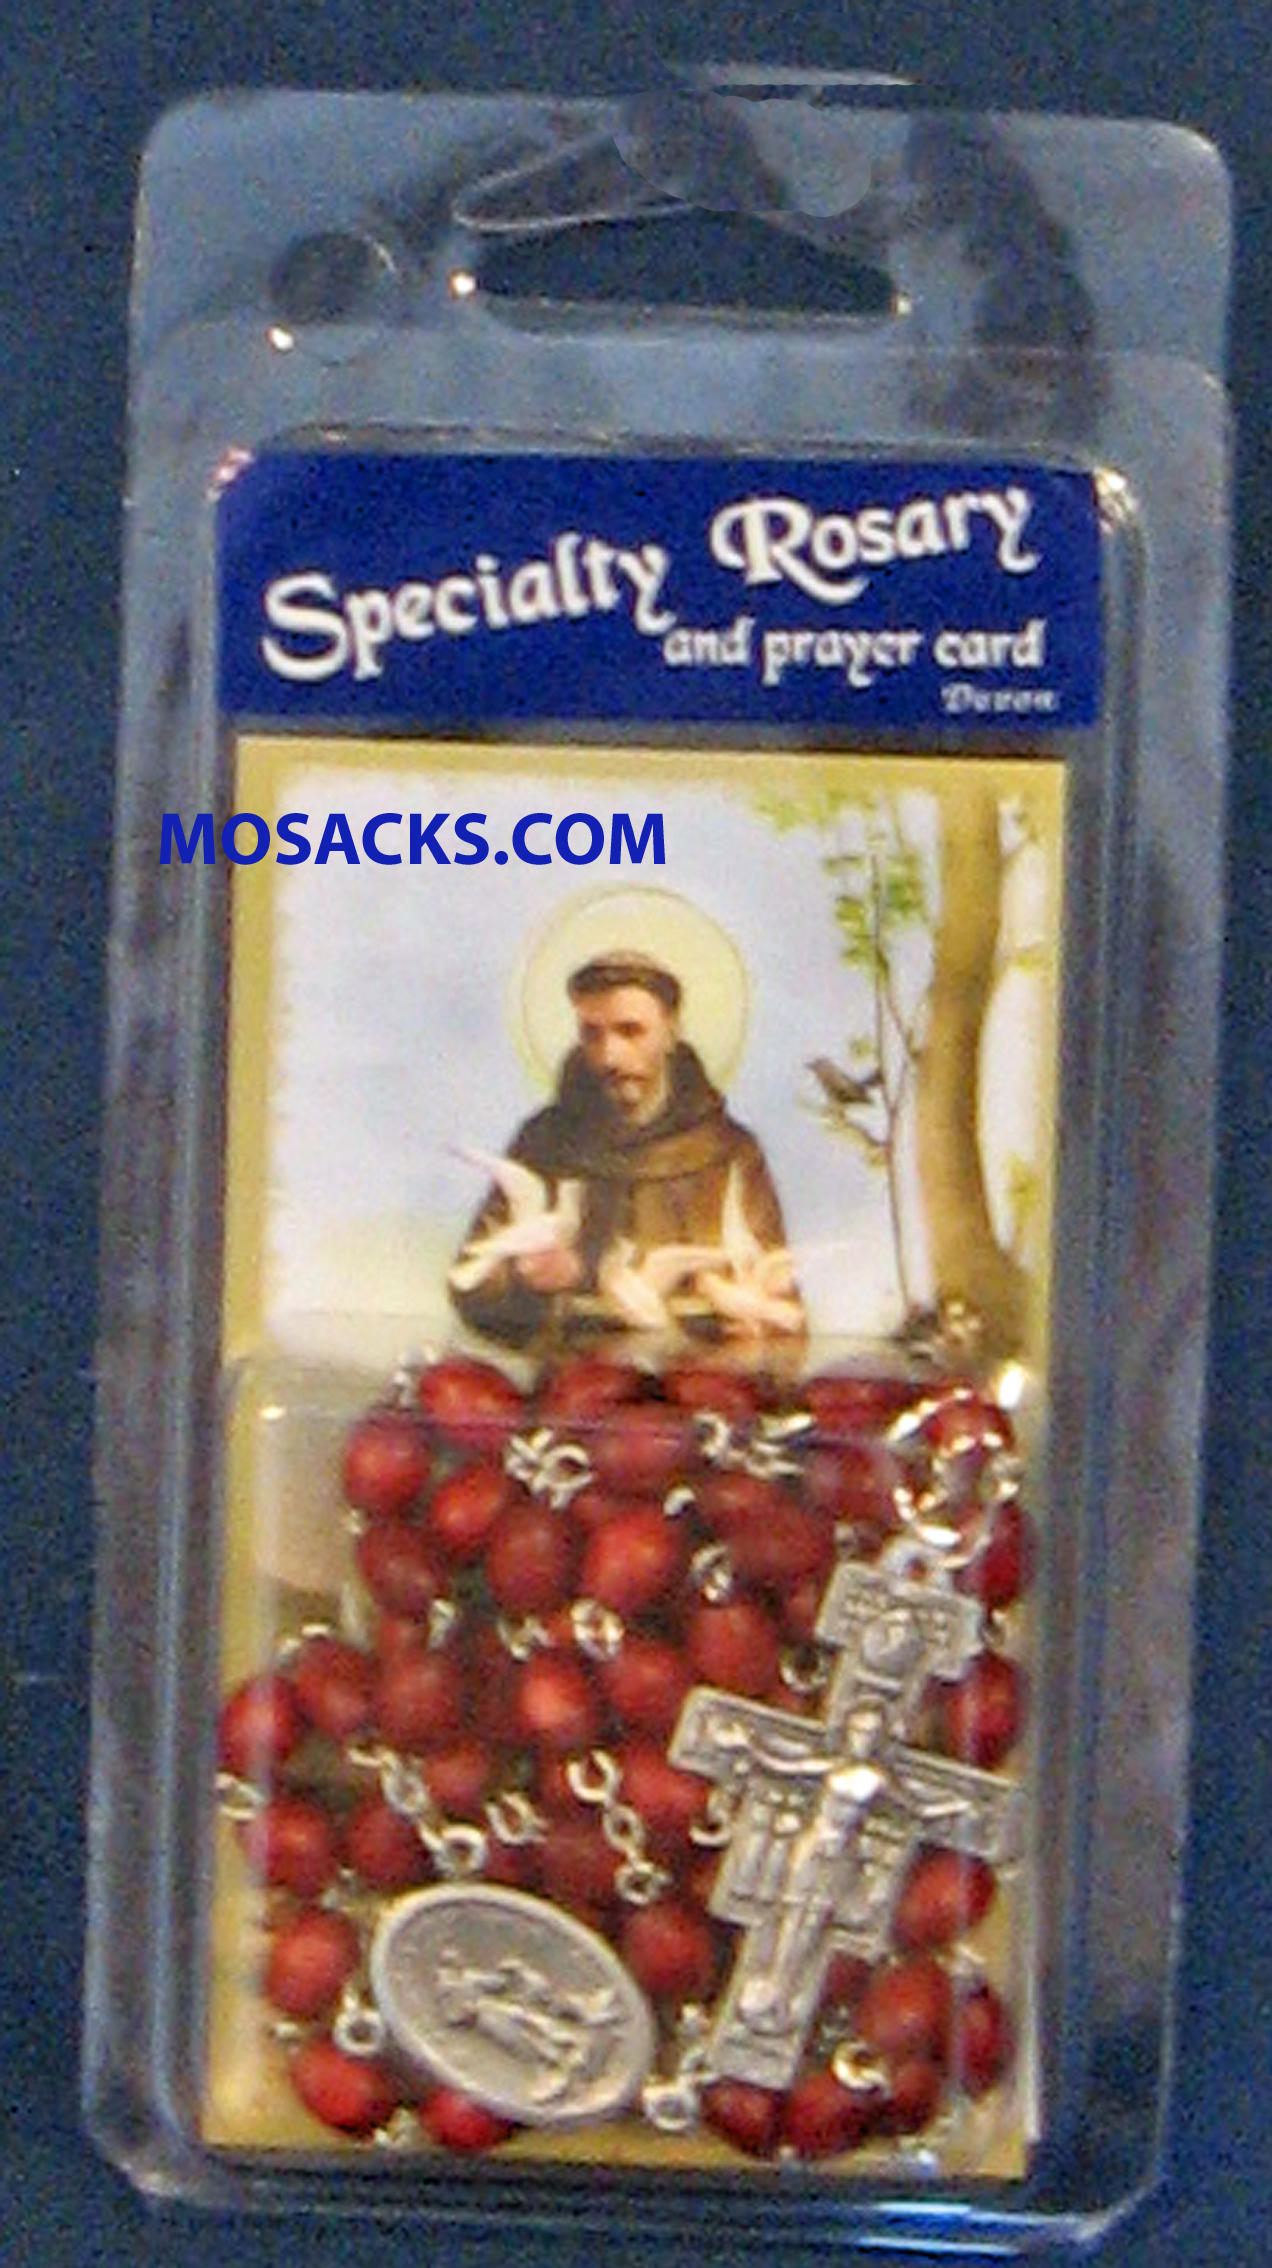 Specialty Rosary St. Francis of Assisi Brown Rosary and Peace Prayer Card 64-08622